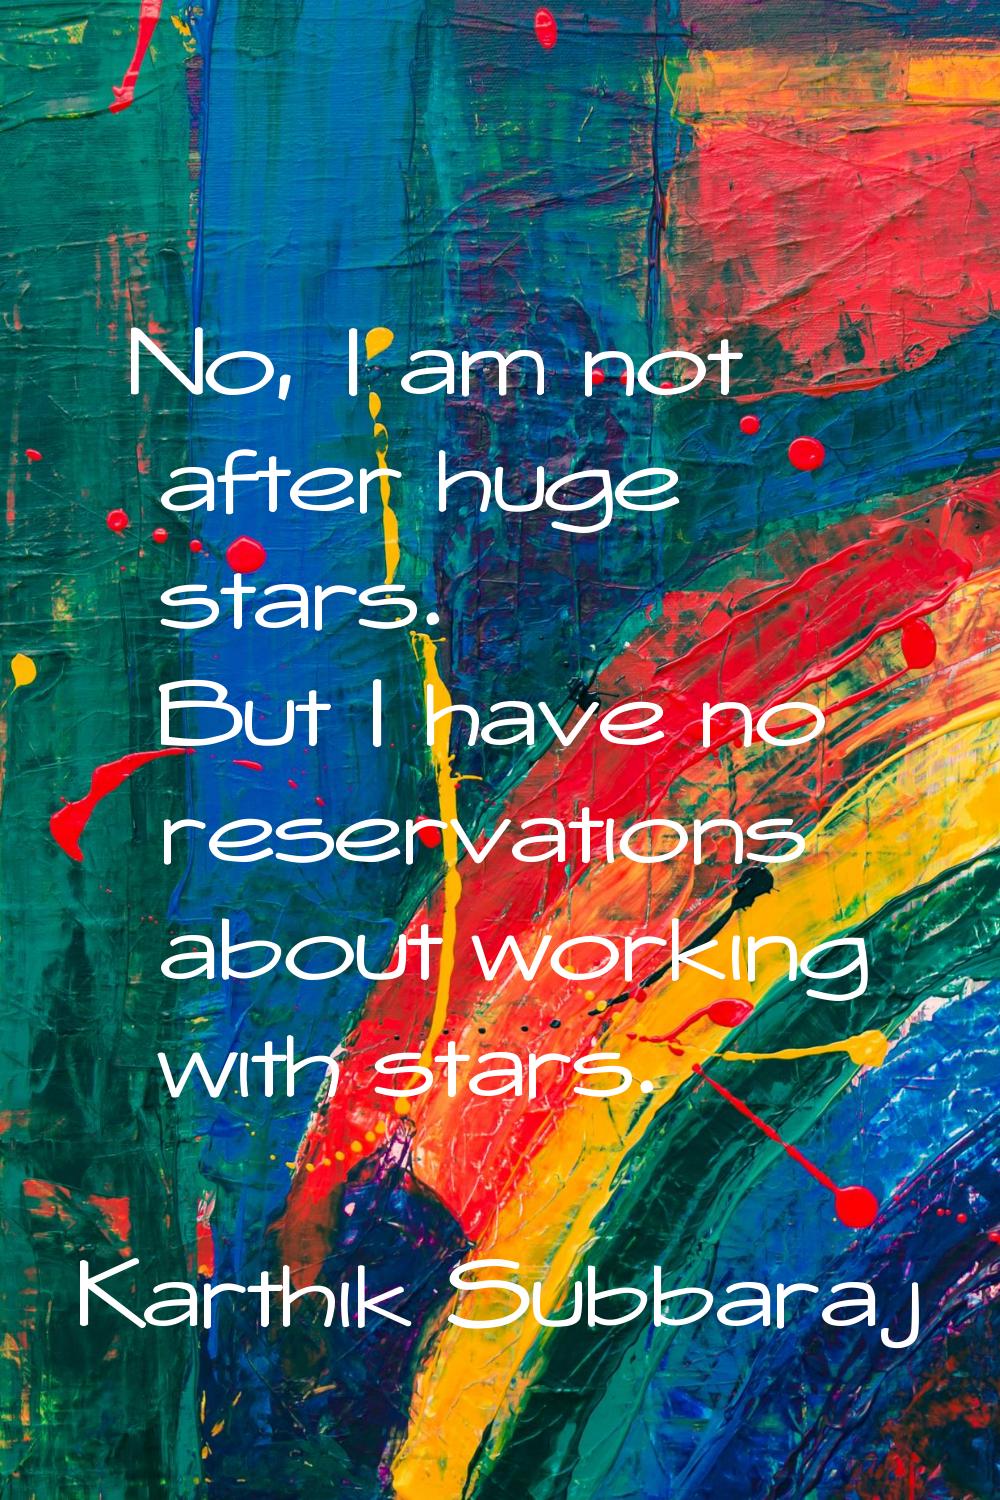 No, I am not after huge stars. But I have no reservations about working with stars.